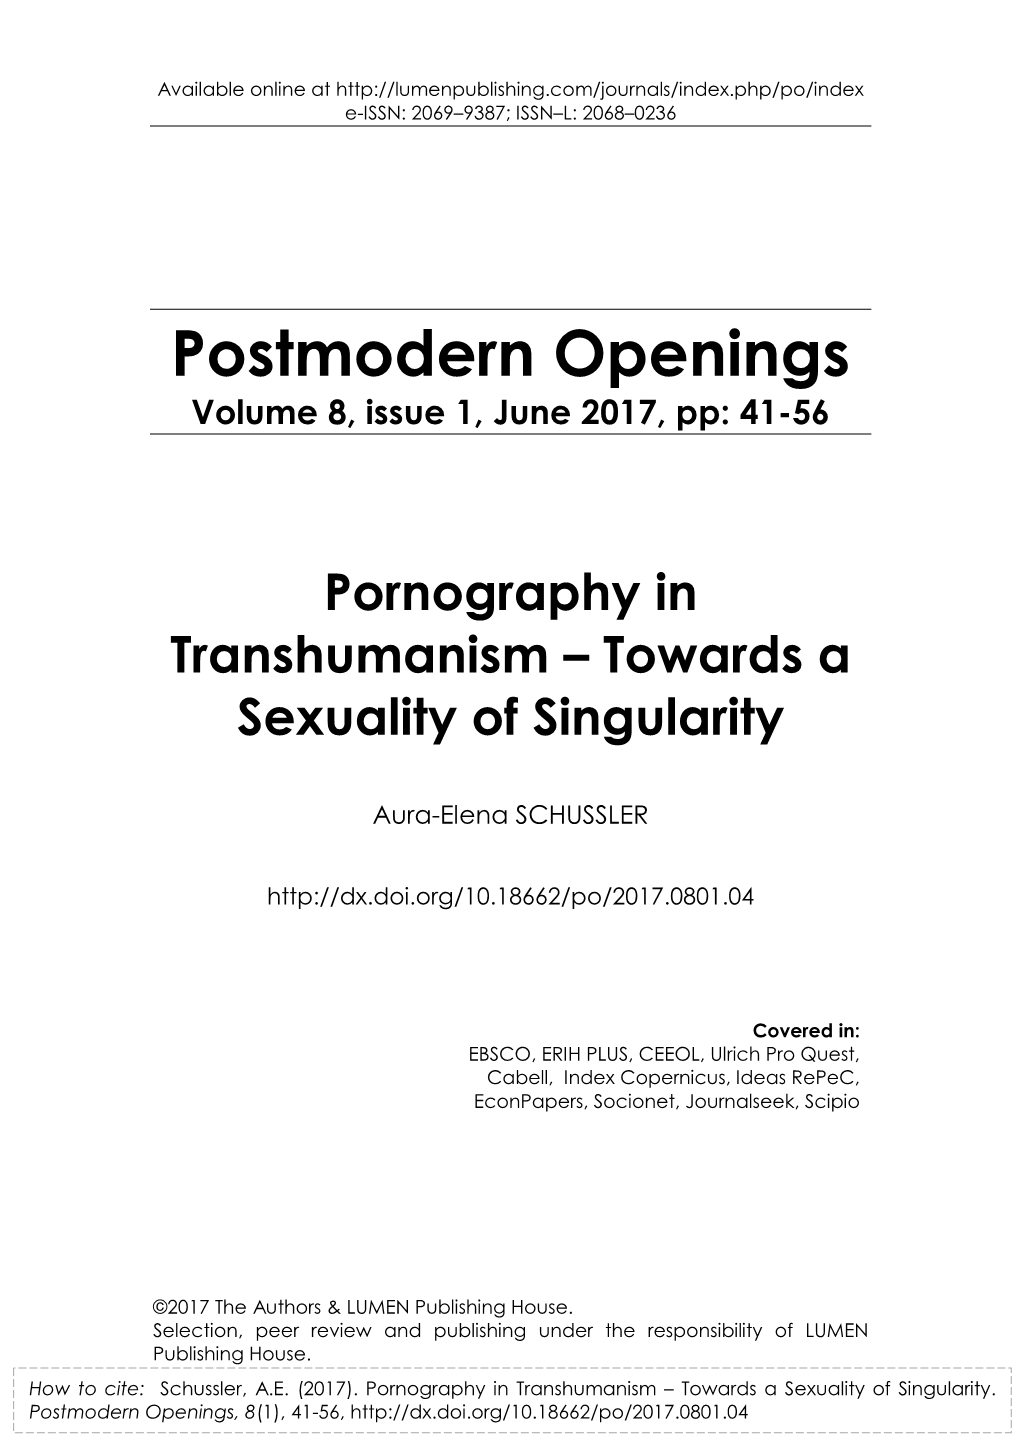 Pornography in Transhumanism – Towards a Sexuality of Singularity